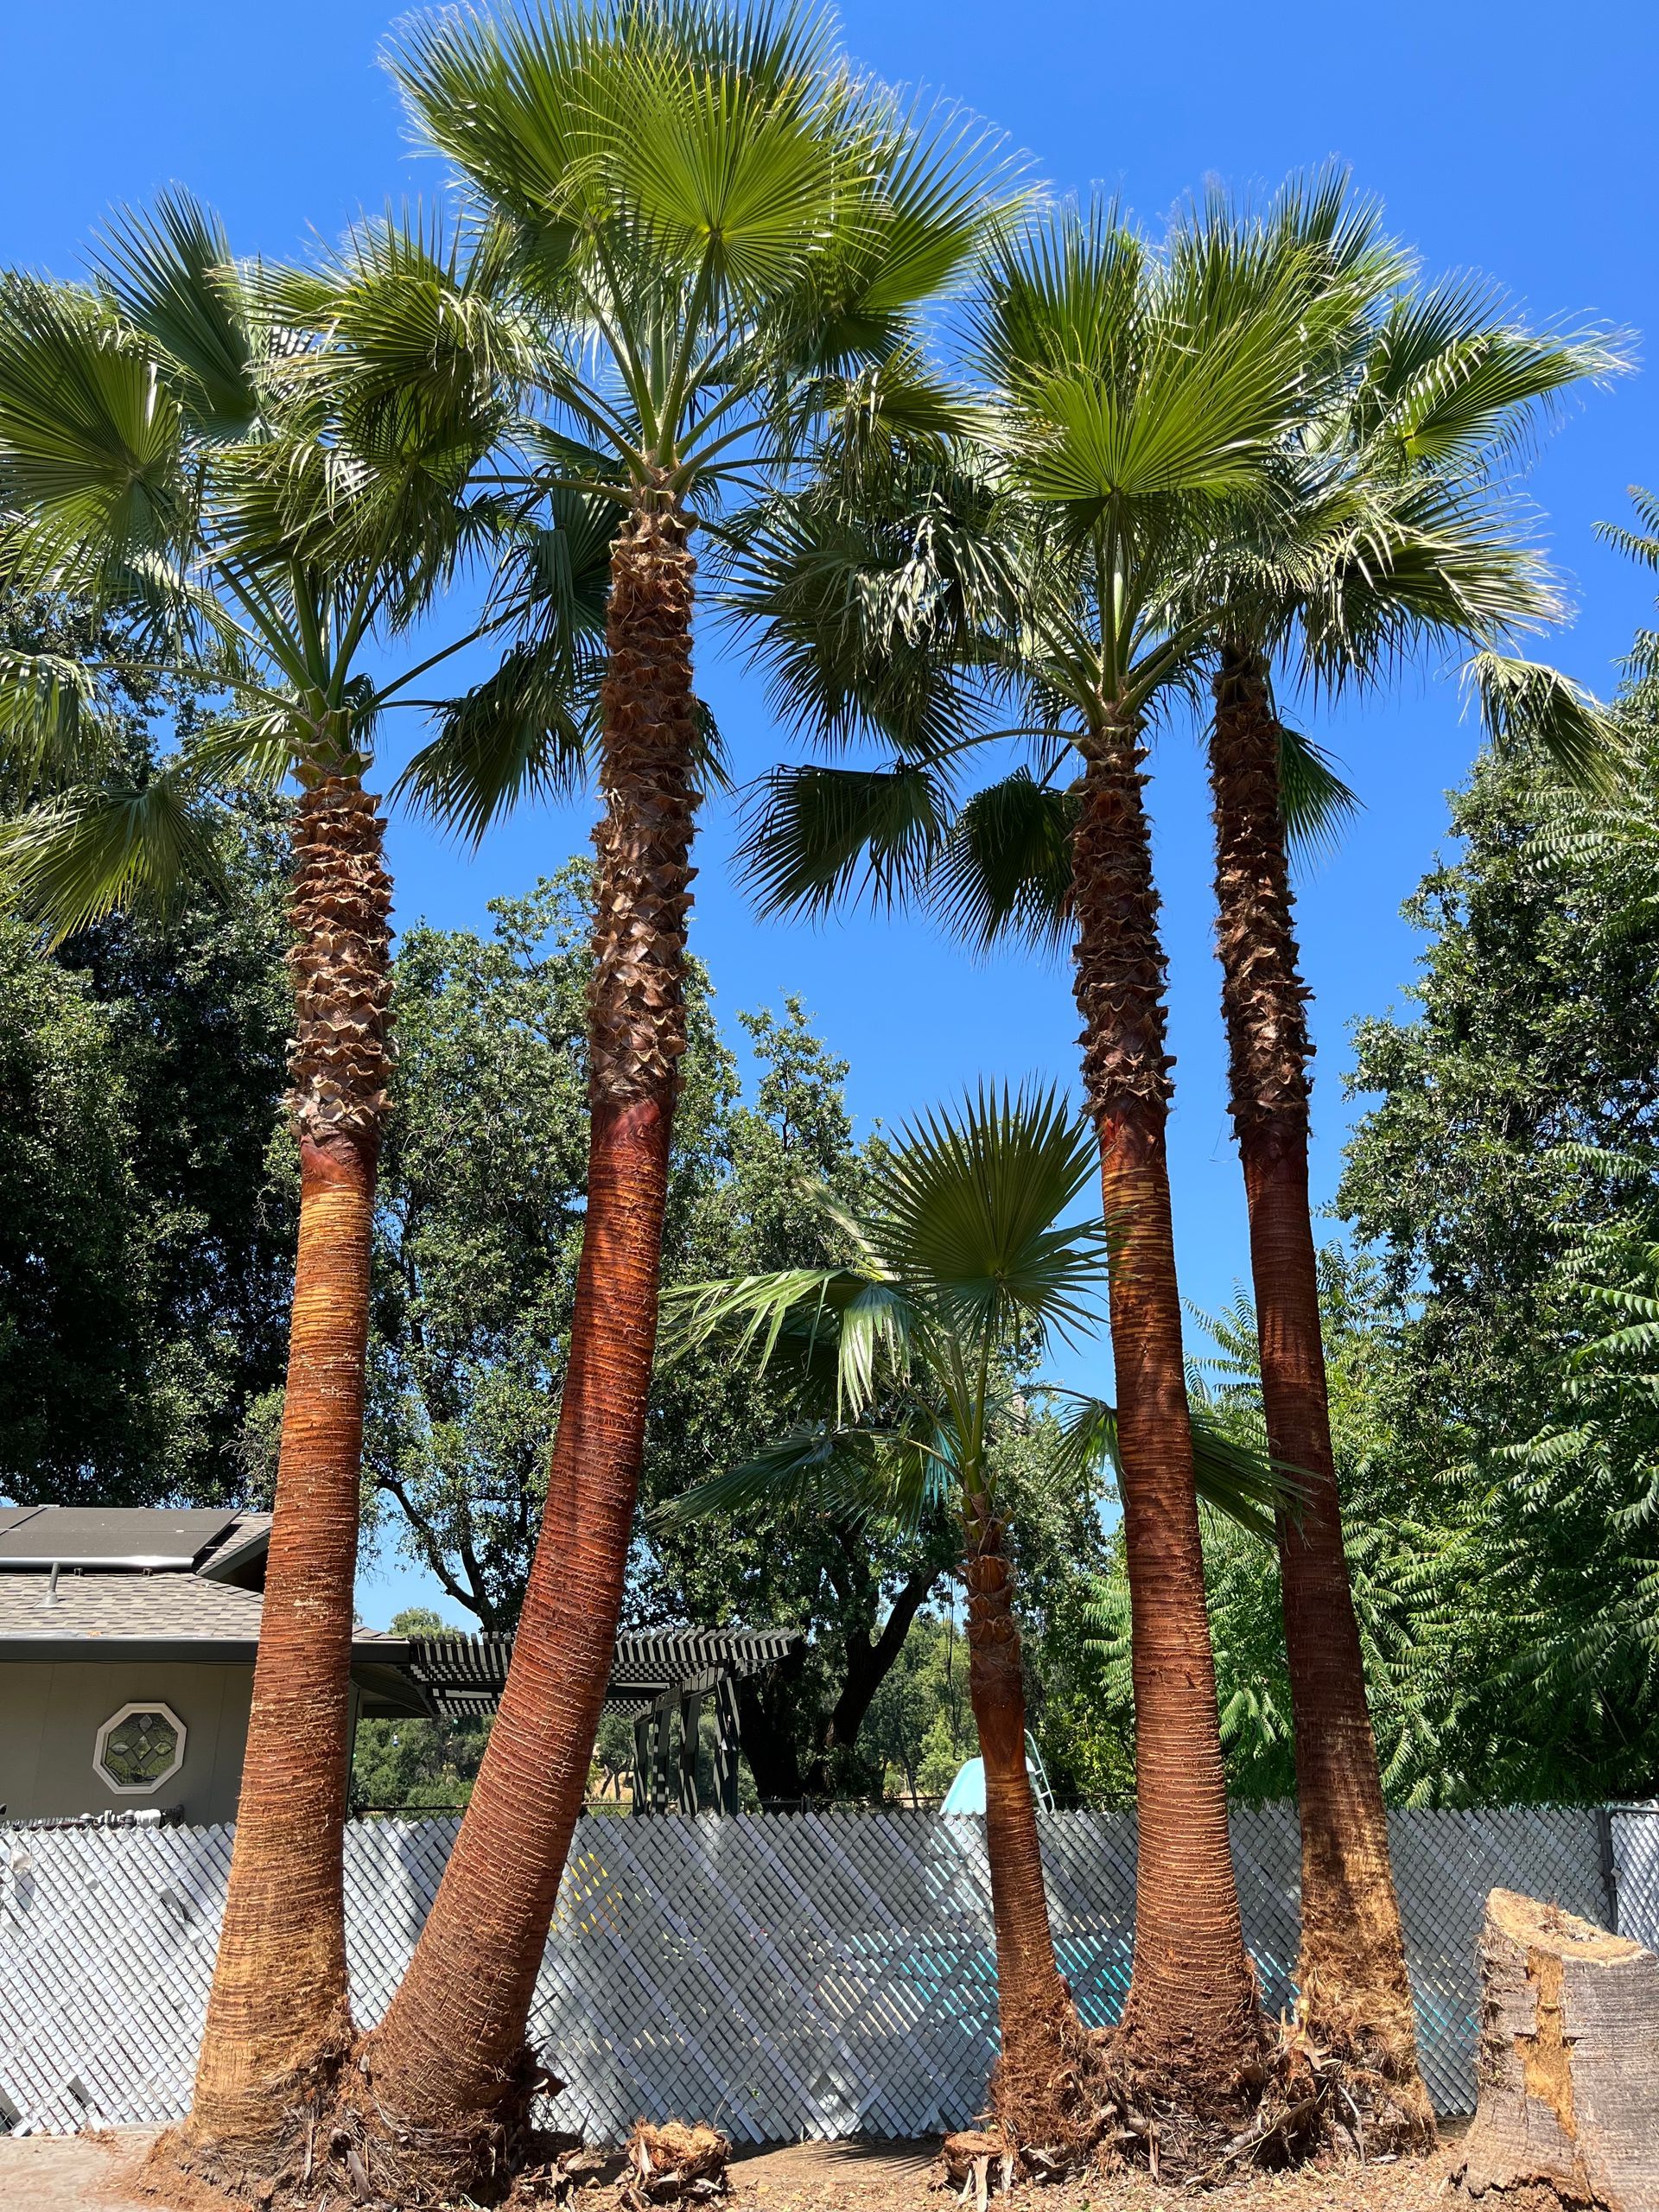 Flow State Tree Works trimming and reviving Palm trees in Anderson, CA